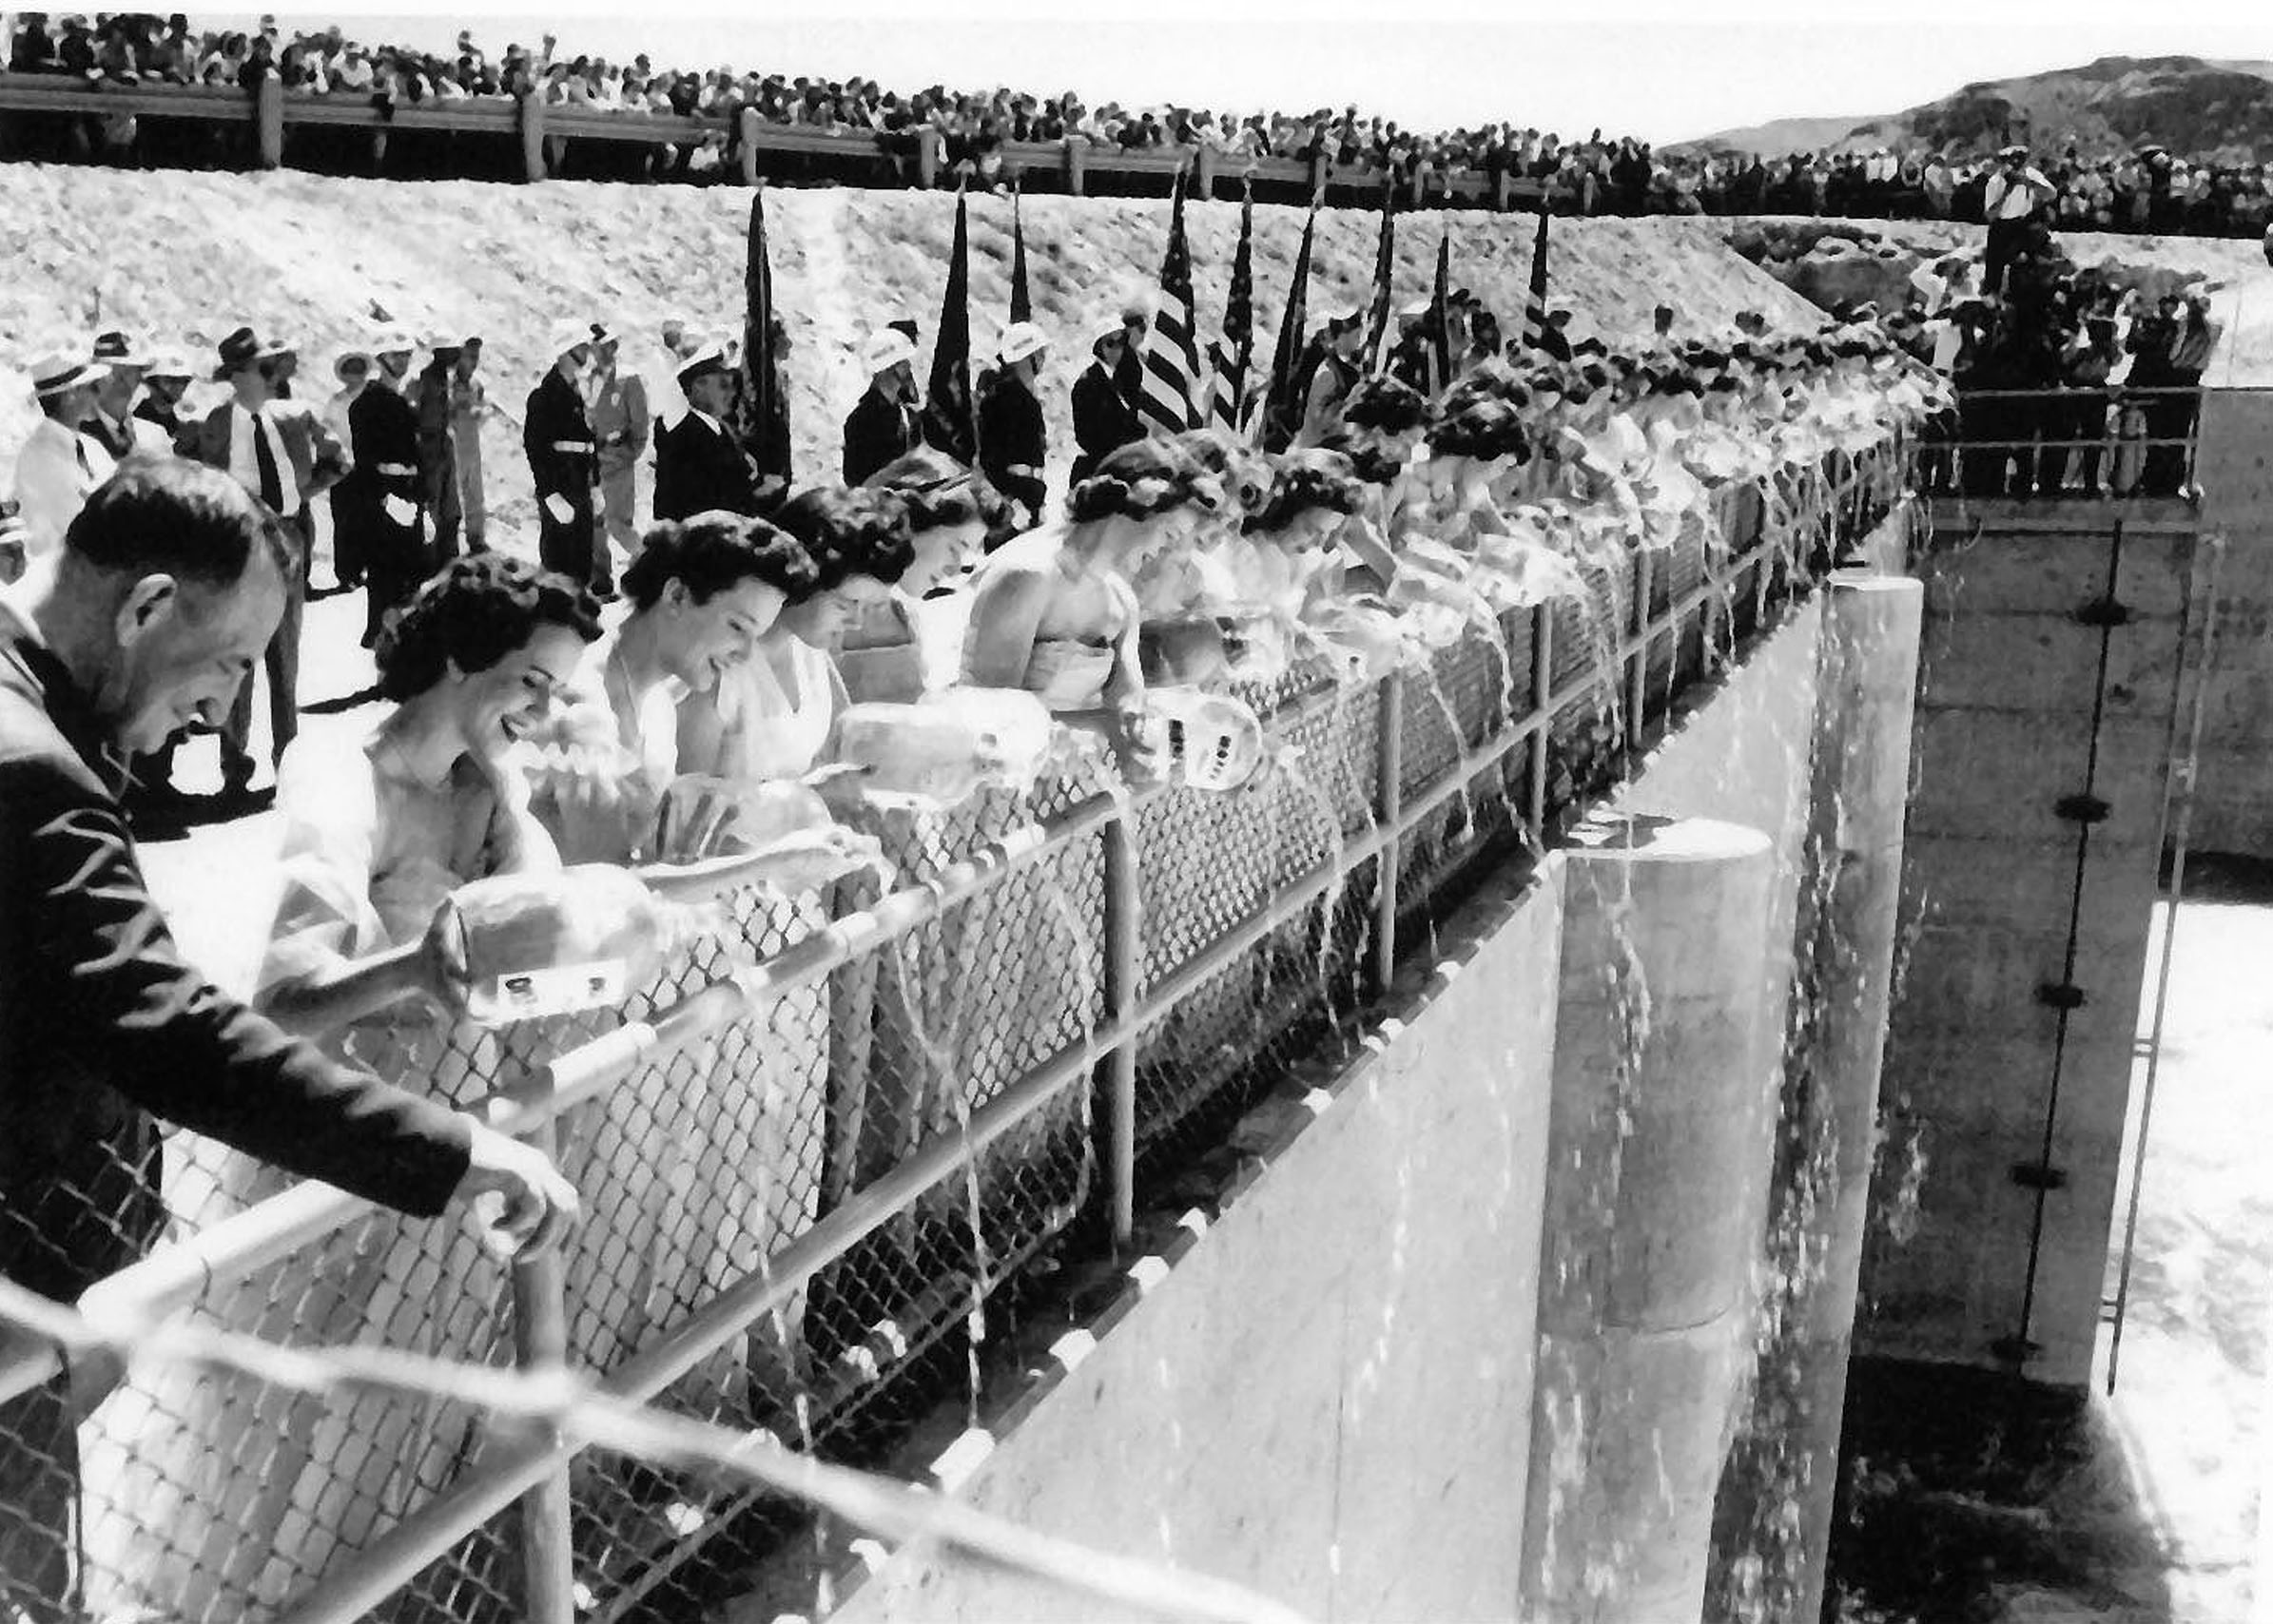 June 14, 1951. 50 maidens from 50 U.S. states at feeder canal ceremony at Grand Coulee Dam. Arizona only brought 1/2 gallon of water. Said California took the other half.